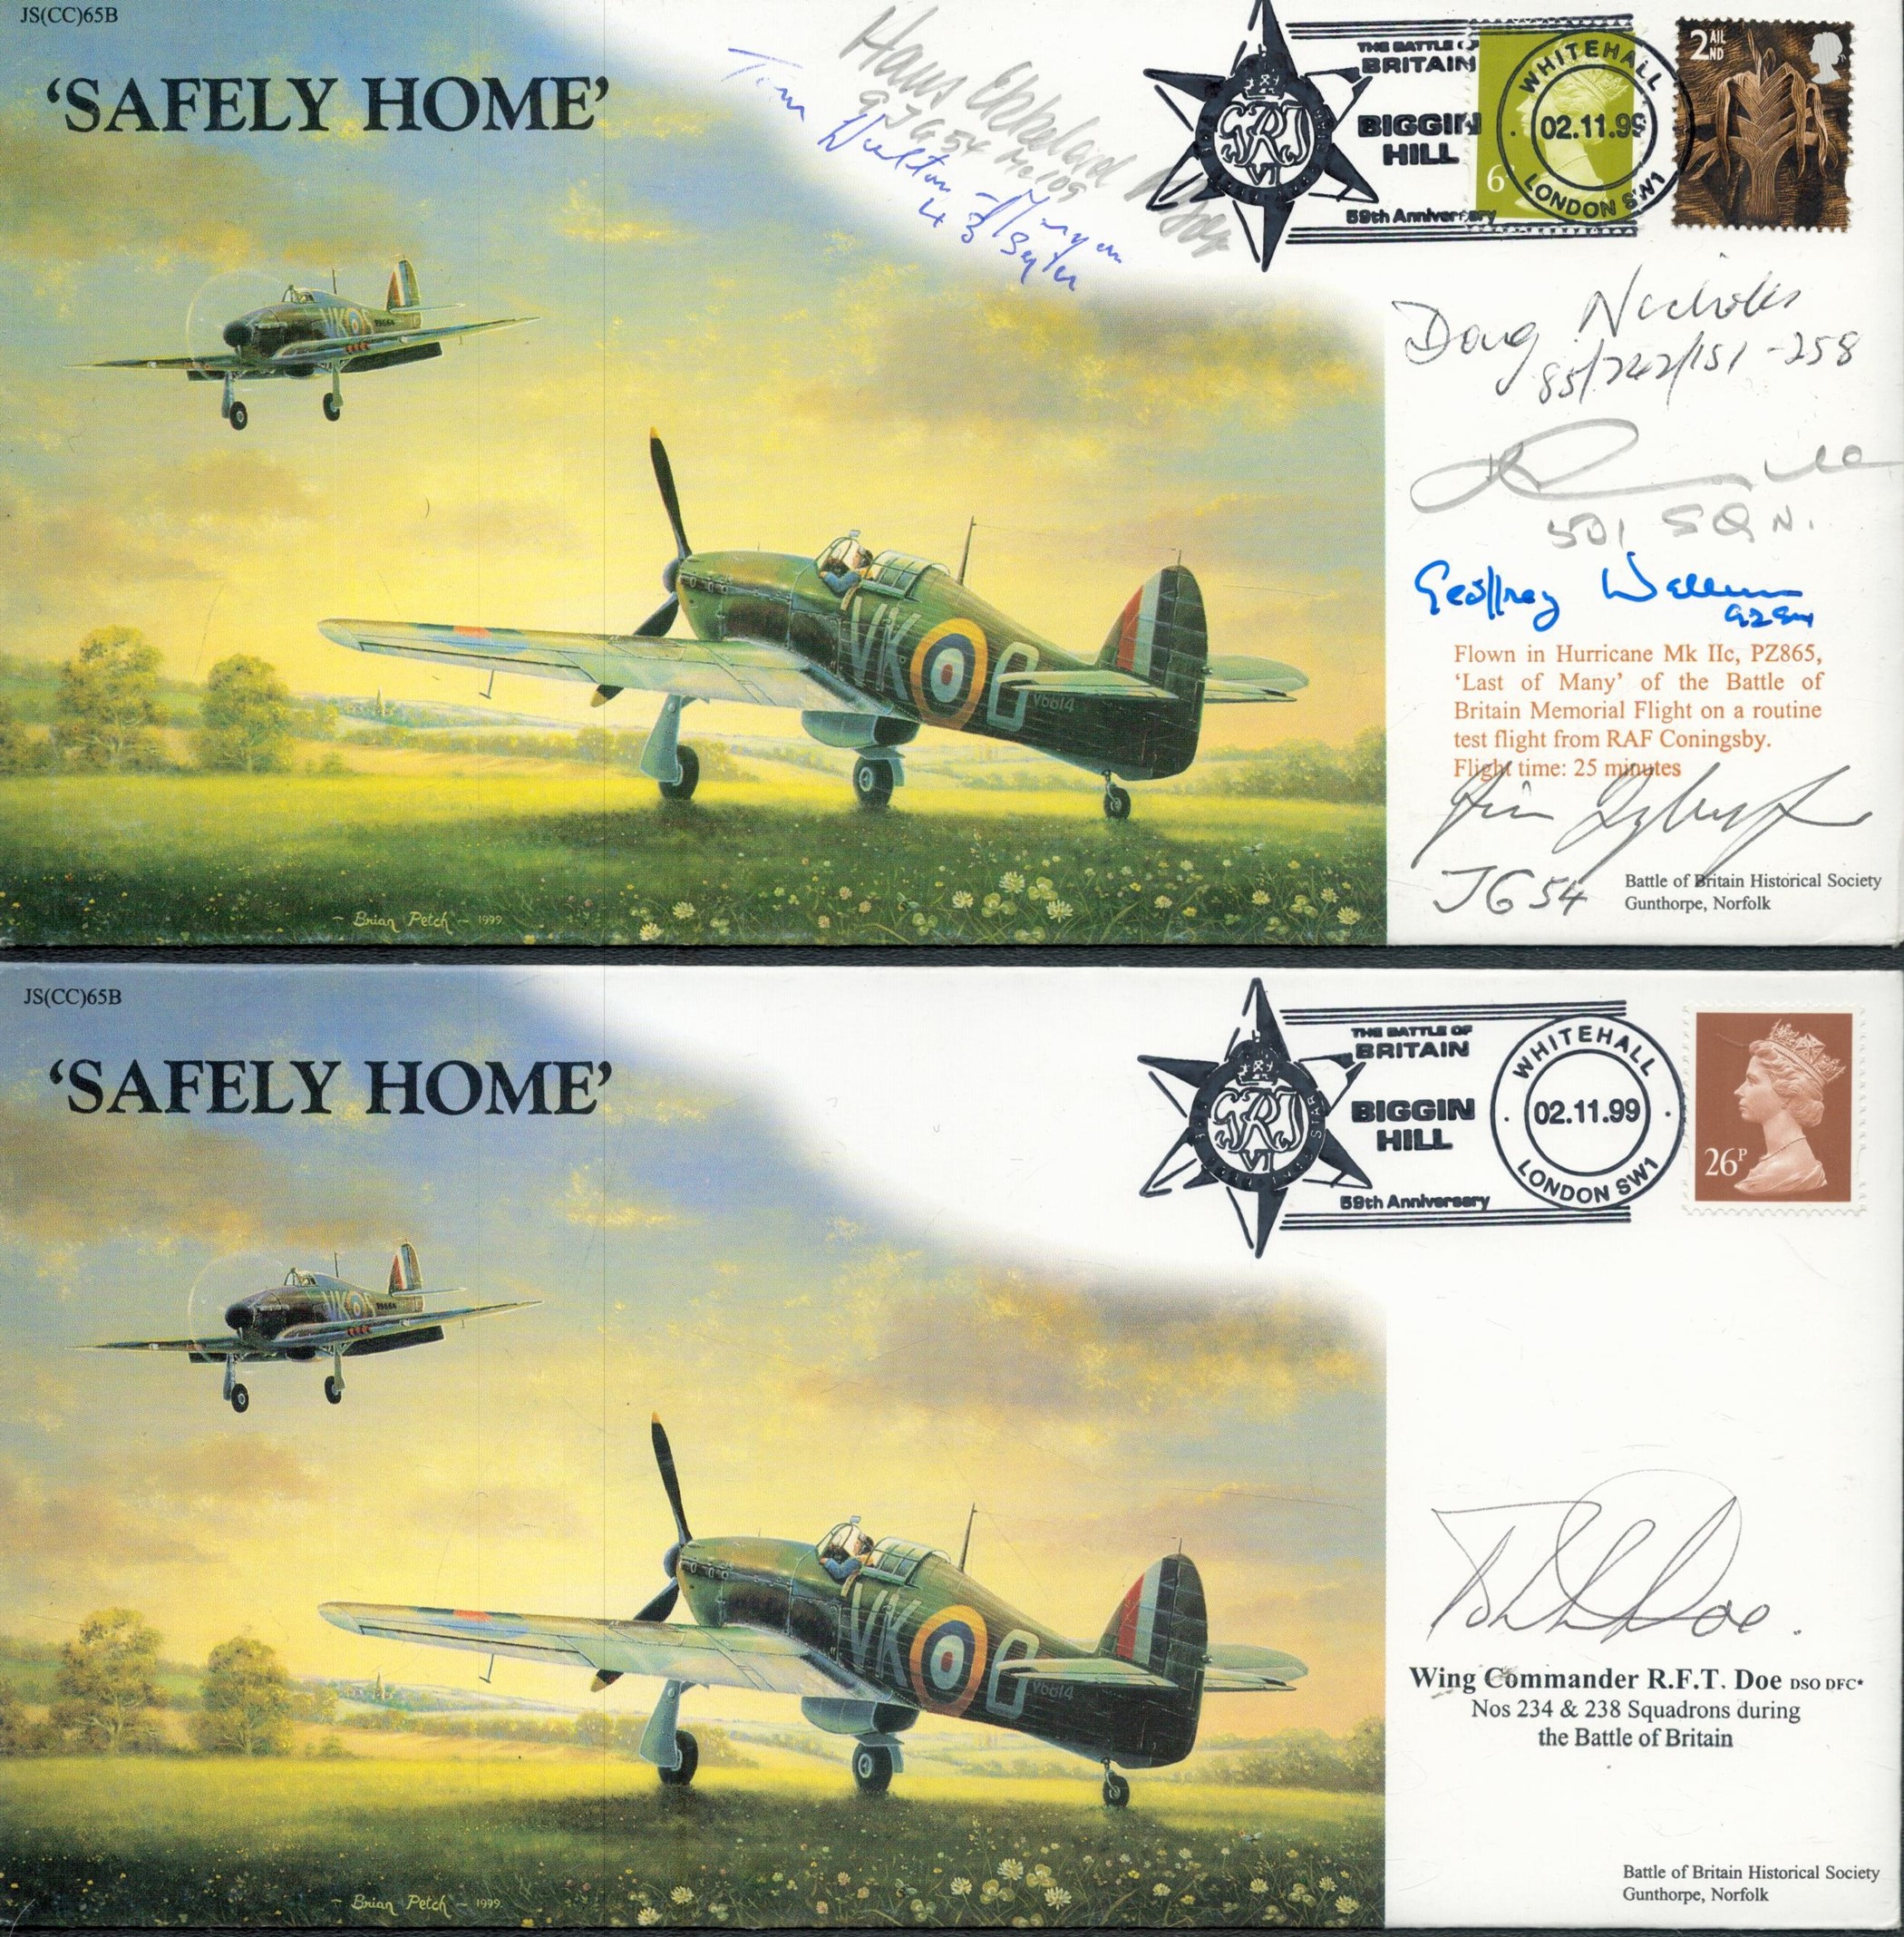 Safely Home Collection of 4 Signed FDCs signatures include Robert F T Doe, Hans-Ekkehard Bob, - Image 2 of 6